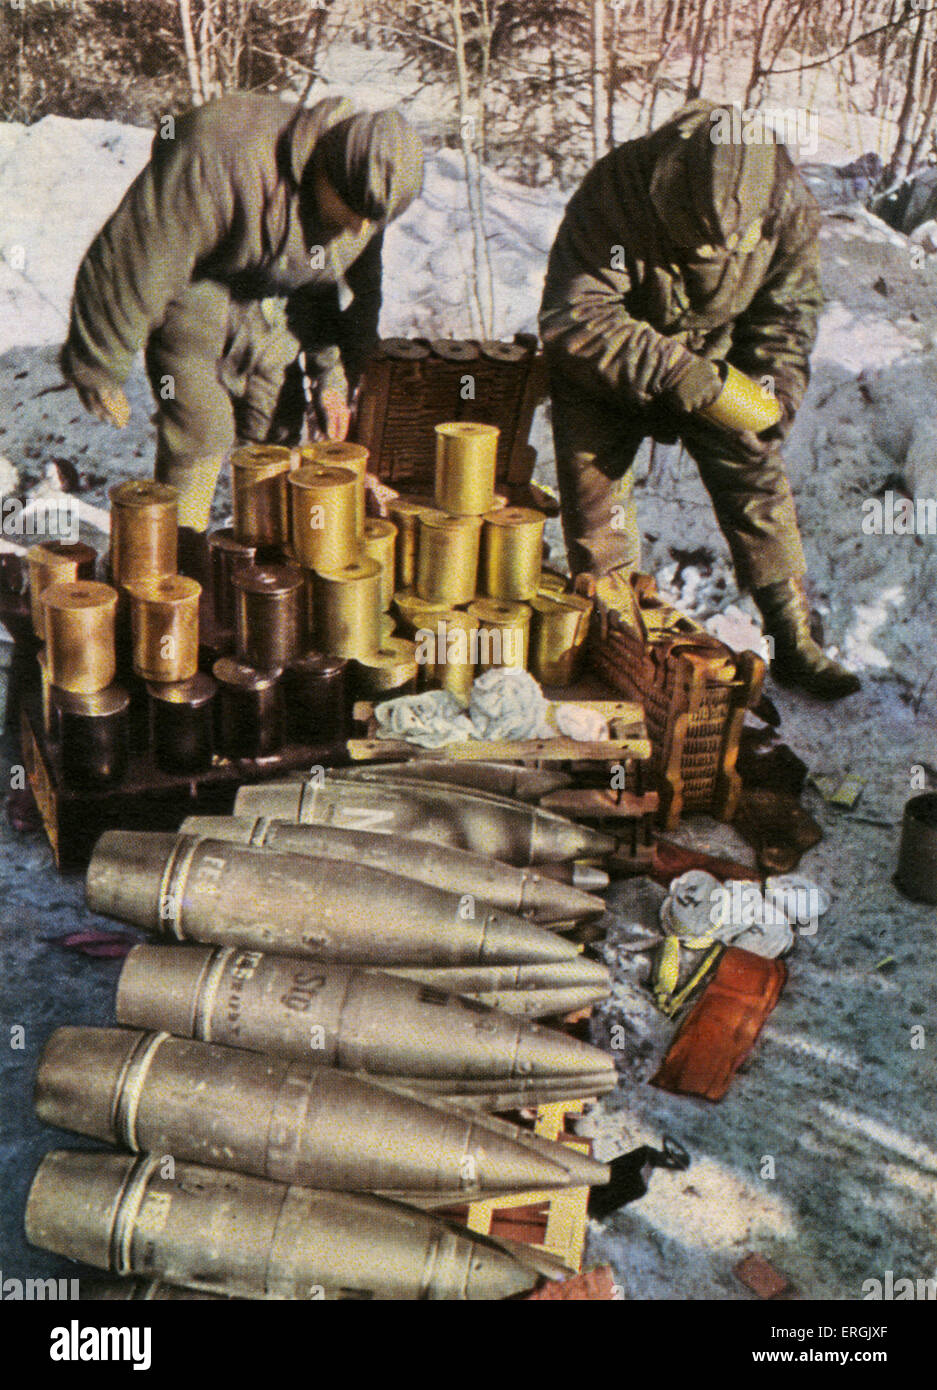 German soldiers handing artillery ammunition during a winter battle, WW2. Caption: 'Use of munition is just as big during winter battles'/ 'El consumo de municion es tambien grande en las batallas invernales'. Spanish postcard intended for supporters of Franco' s Republic which was in favour of the Third Reich. Stock Photo